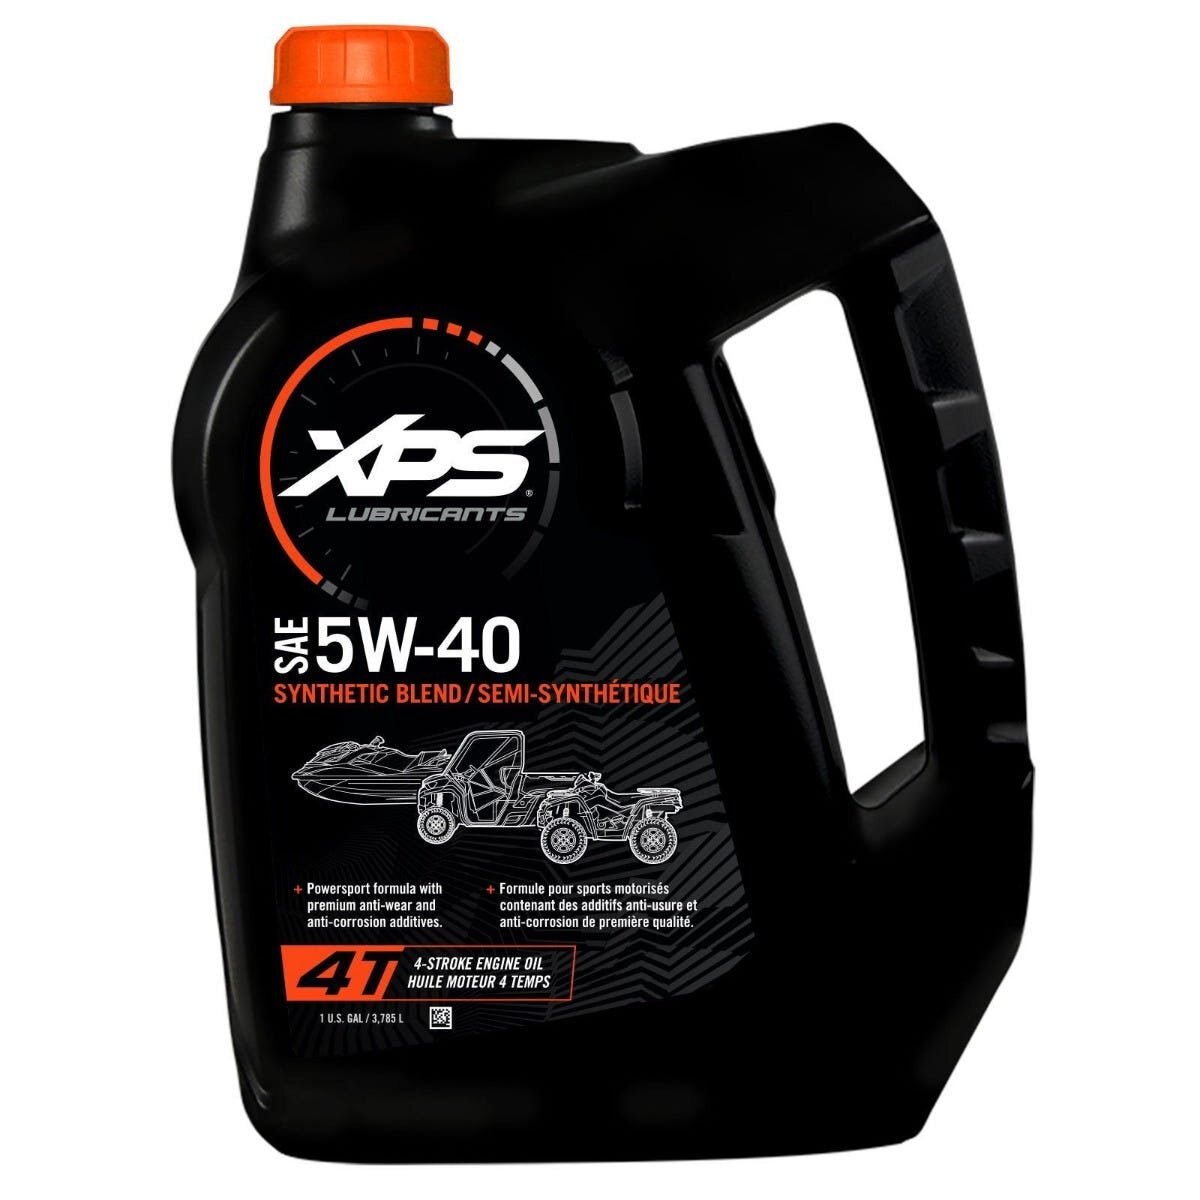 5W 40 Synthetic Blend Premium 4 Stroke Engine Oil